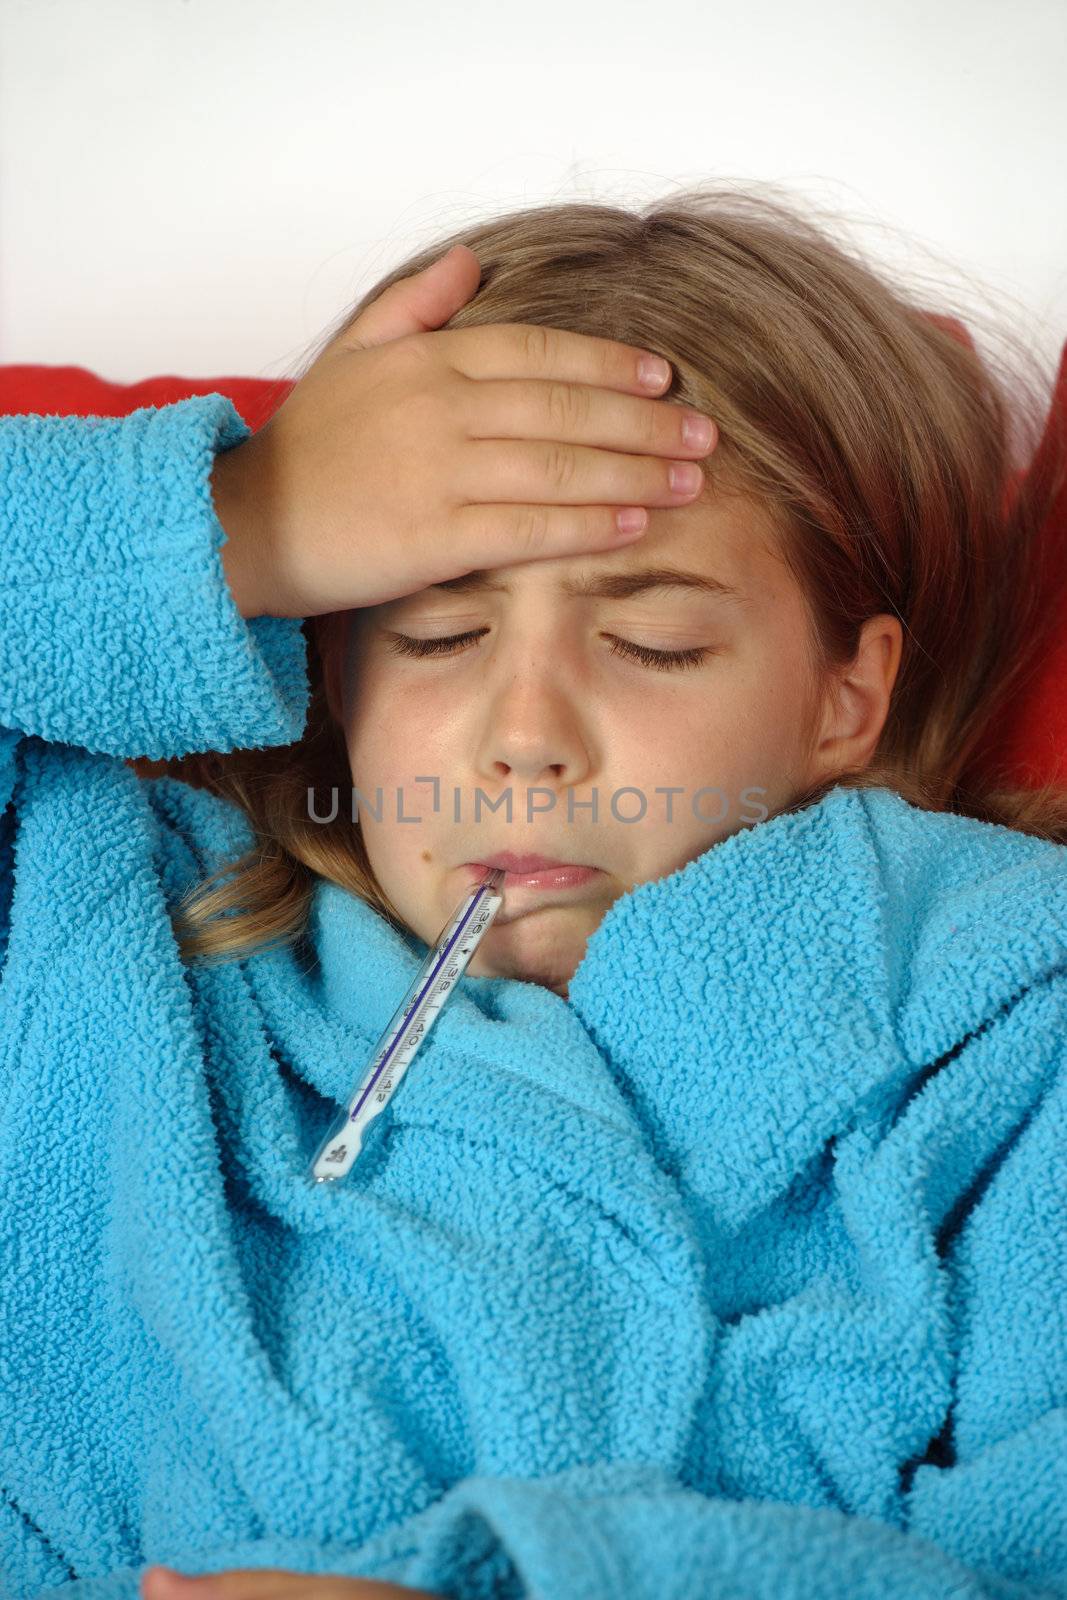 Sick child with thermometer and hand on her forehead.
